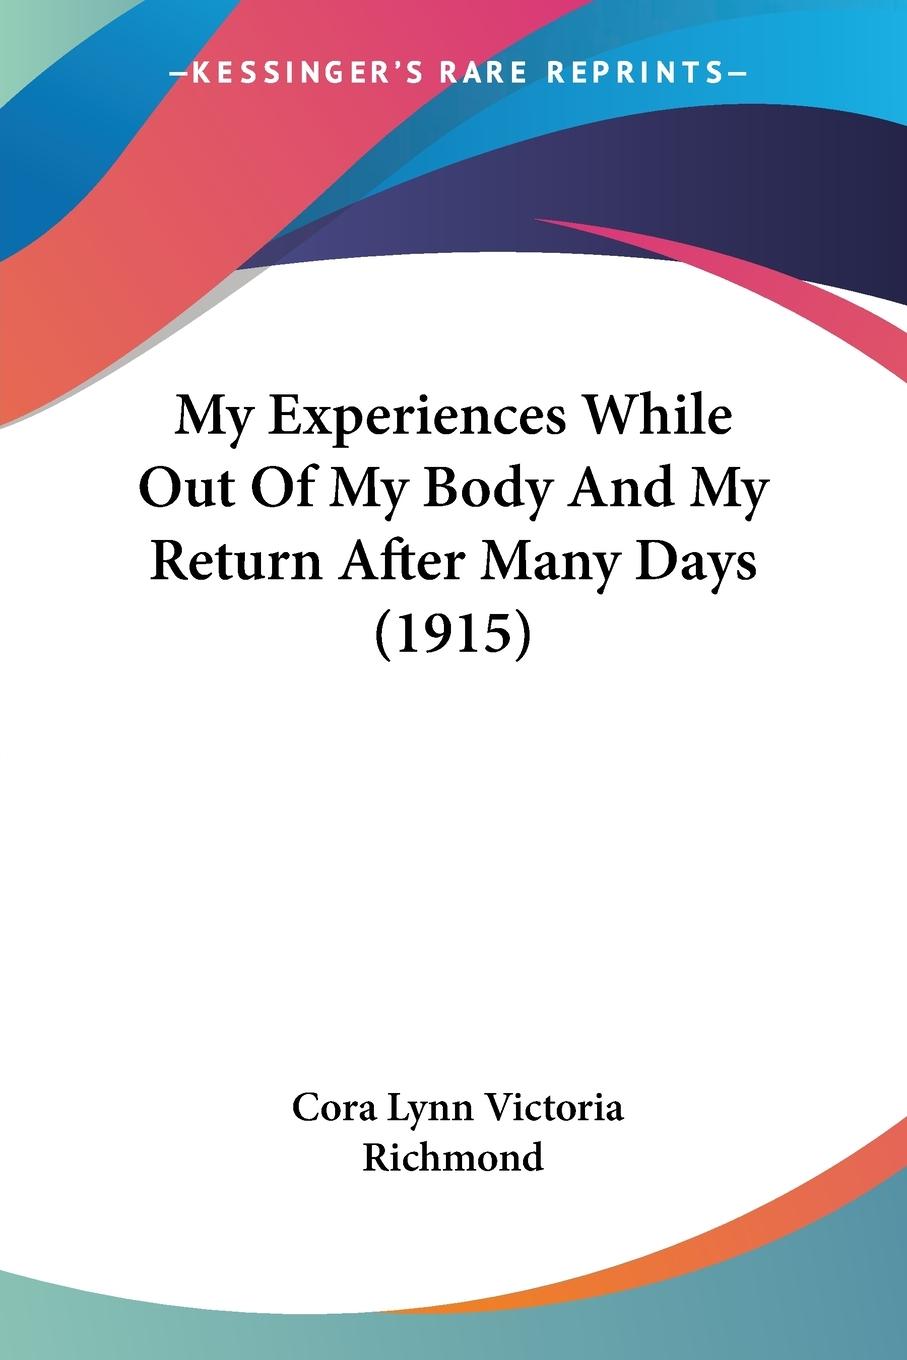 My Experiences While Out Of My Body And My Return After Many Days (1915) - Richmond, Cora Lynn Victoria